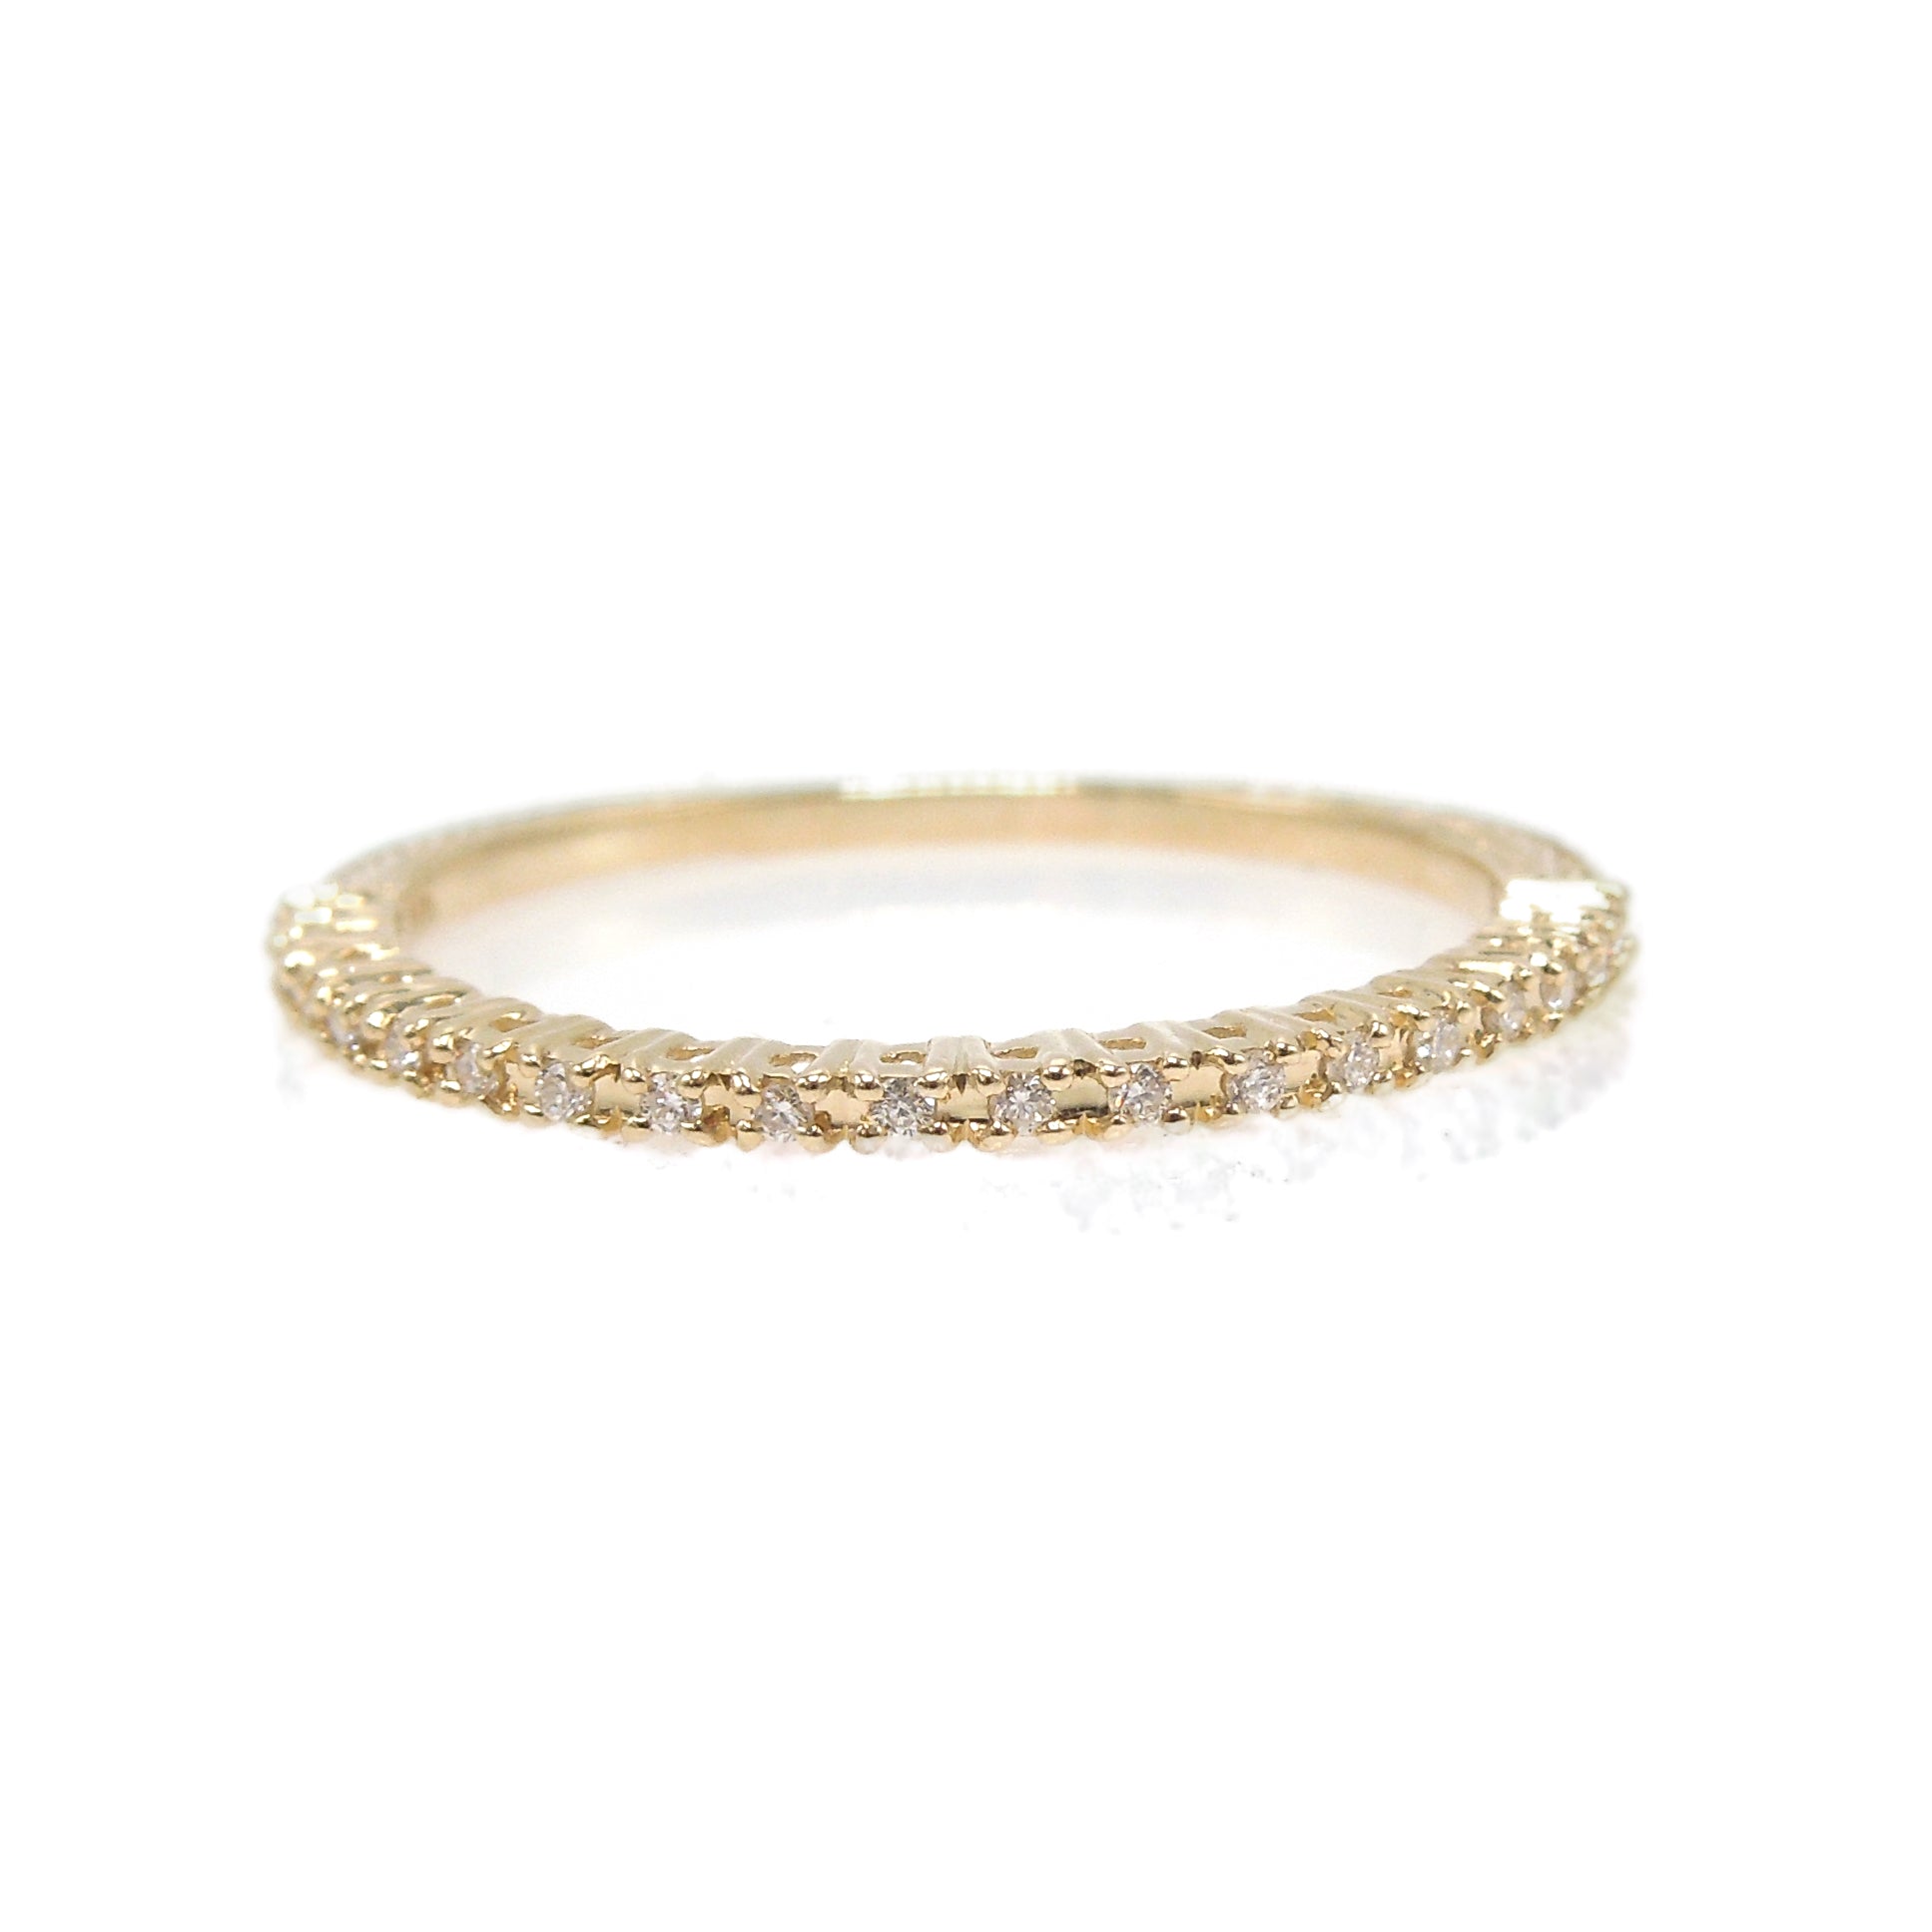 Narrow 14K Yellow Gold and Diamond Band - Perfect for Stacking